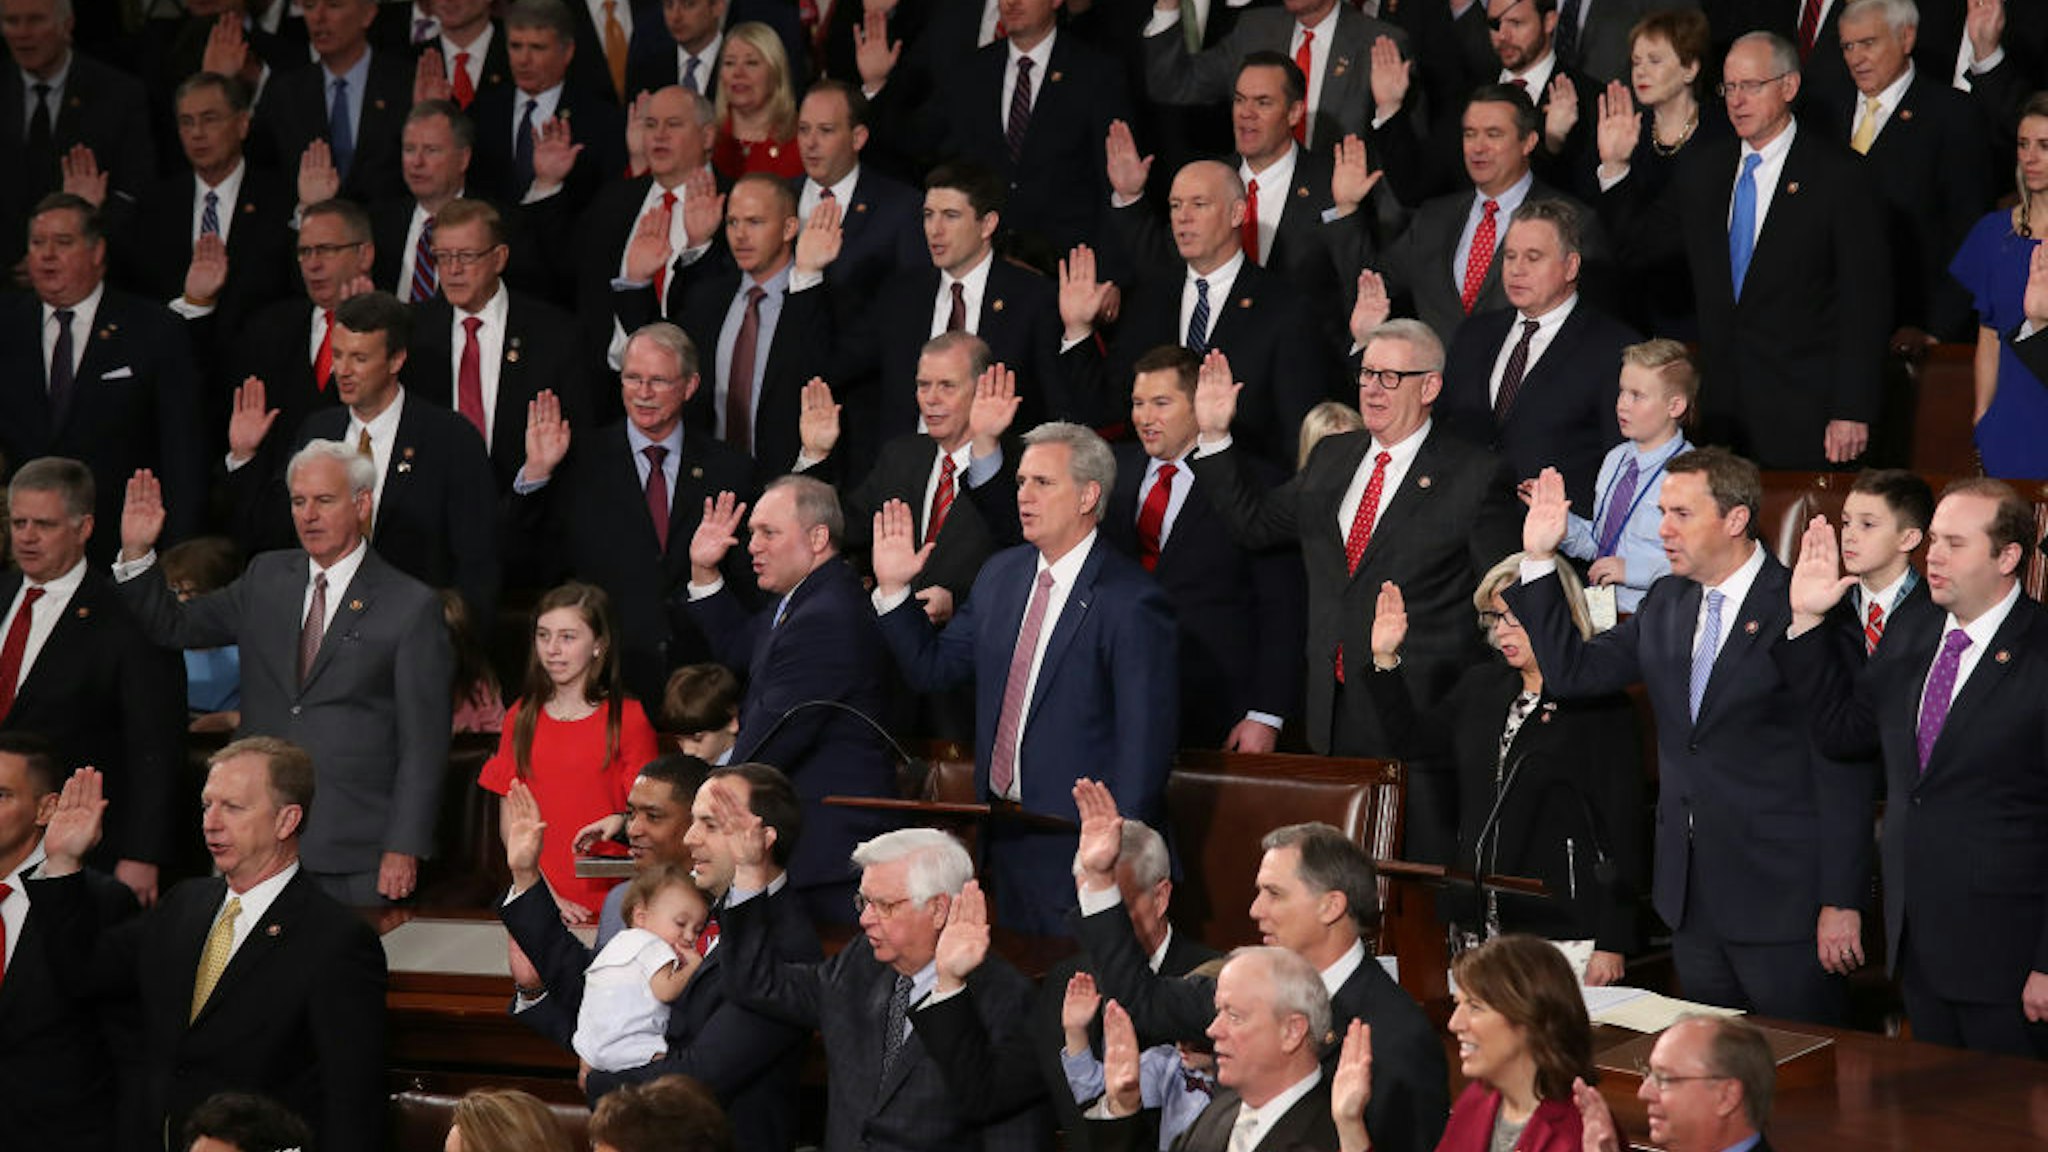 WASHINGTON, DC - JANUARY 03: Republican members of the House of Representatives are sworn in during the first session of the 116th Congress at the U.S. Capitol January 03, 2019 in Washington, DC. Under the cloud of a partial federal government shutdown, Speaker of the House Nancy Pelosi reclaimed her former title as Speaker and her fellow Democrats will take control of the House of Representatives for the second time in eight years. (Photo by Win McNamee/Getty Images)